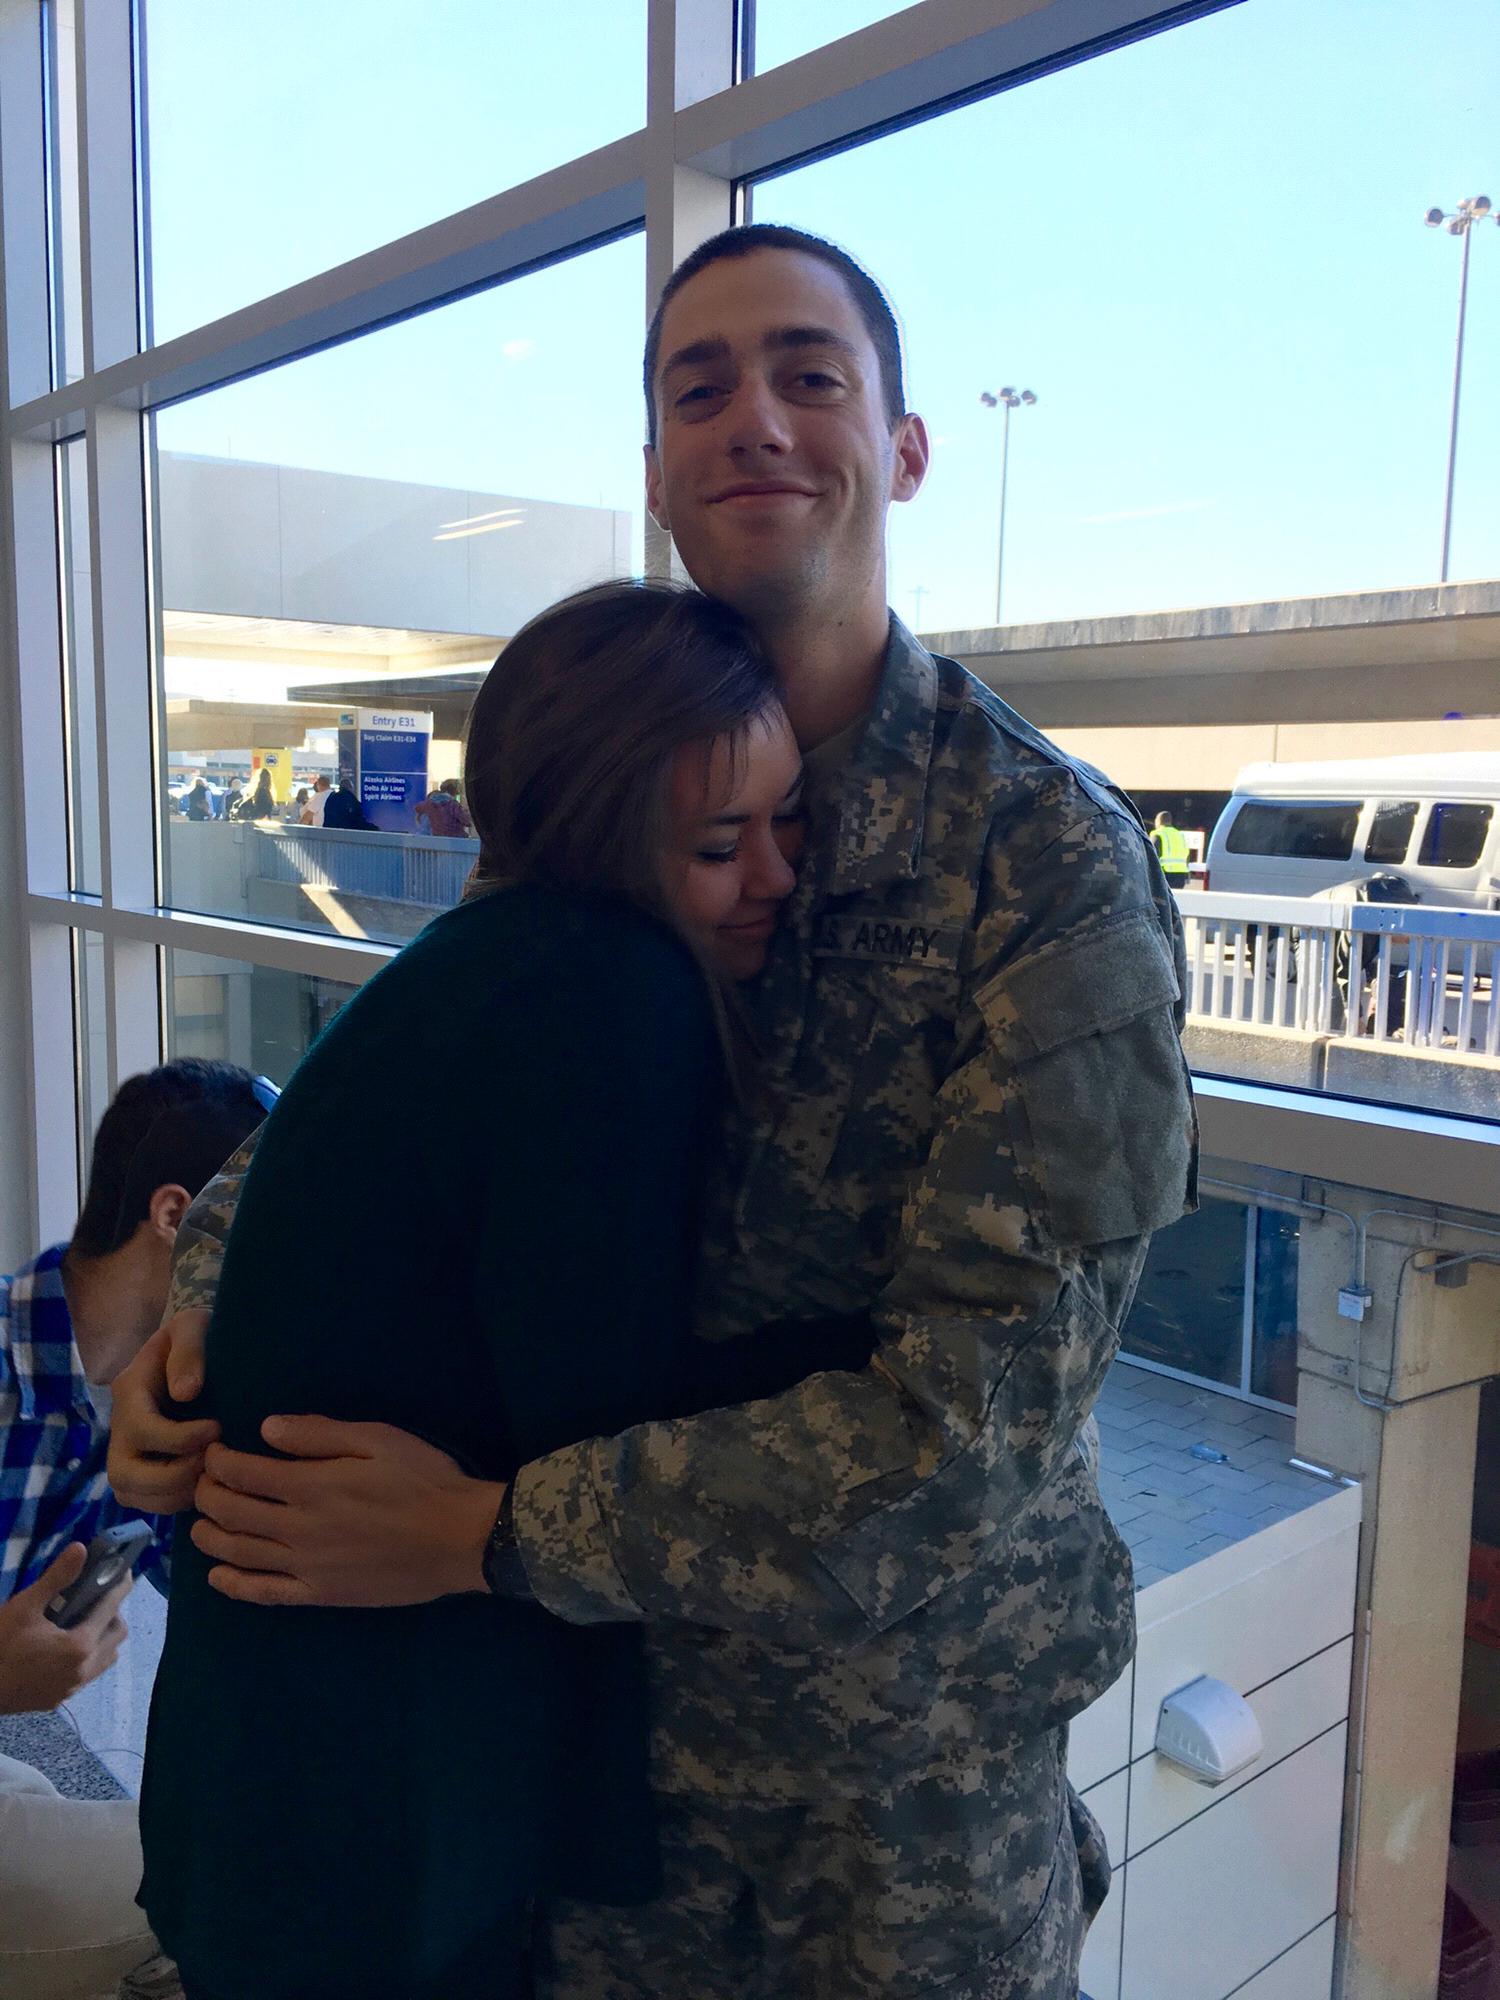 When Jeremiah got home from basic training. Jay’s basic was early on in our relationship, but despite the distance and minimal communication, we knew we were meant to be together. December 18th, 2018